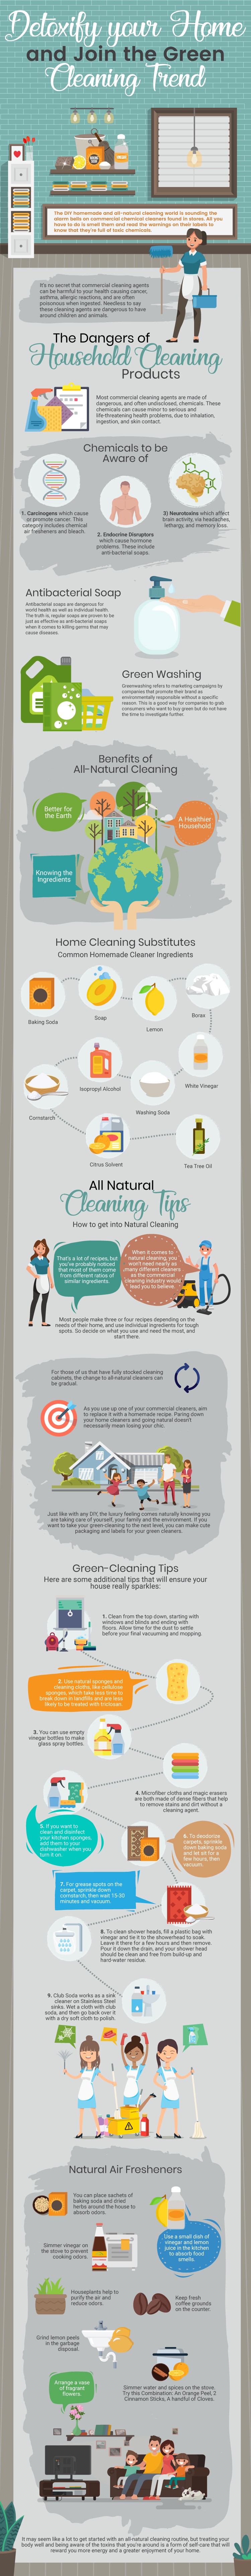 Detoxify-your-home-green-cleaning-trend